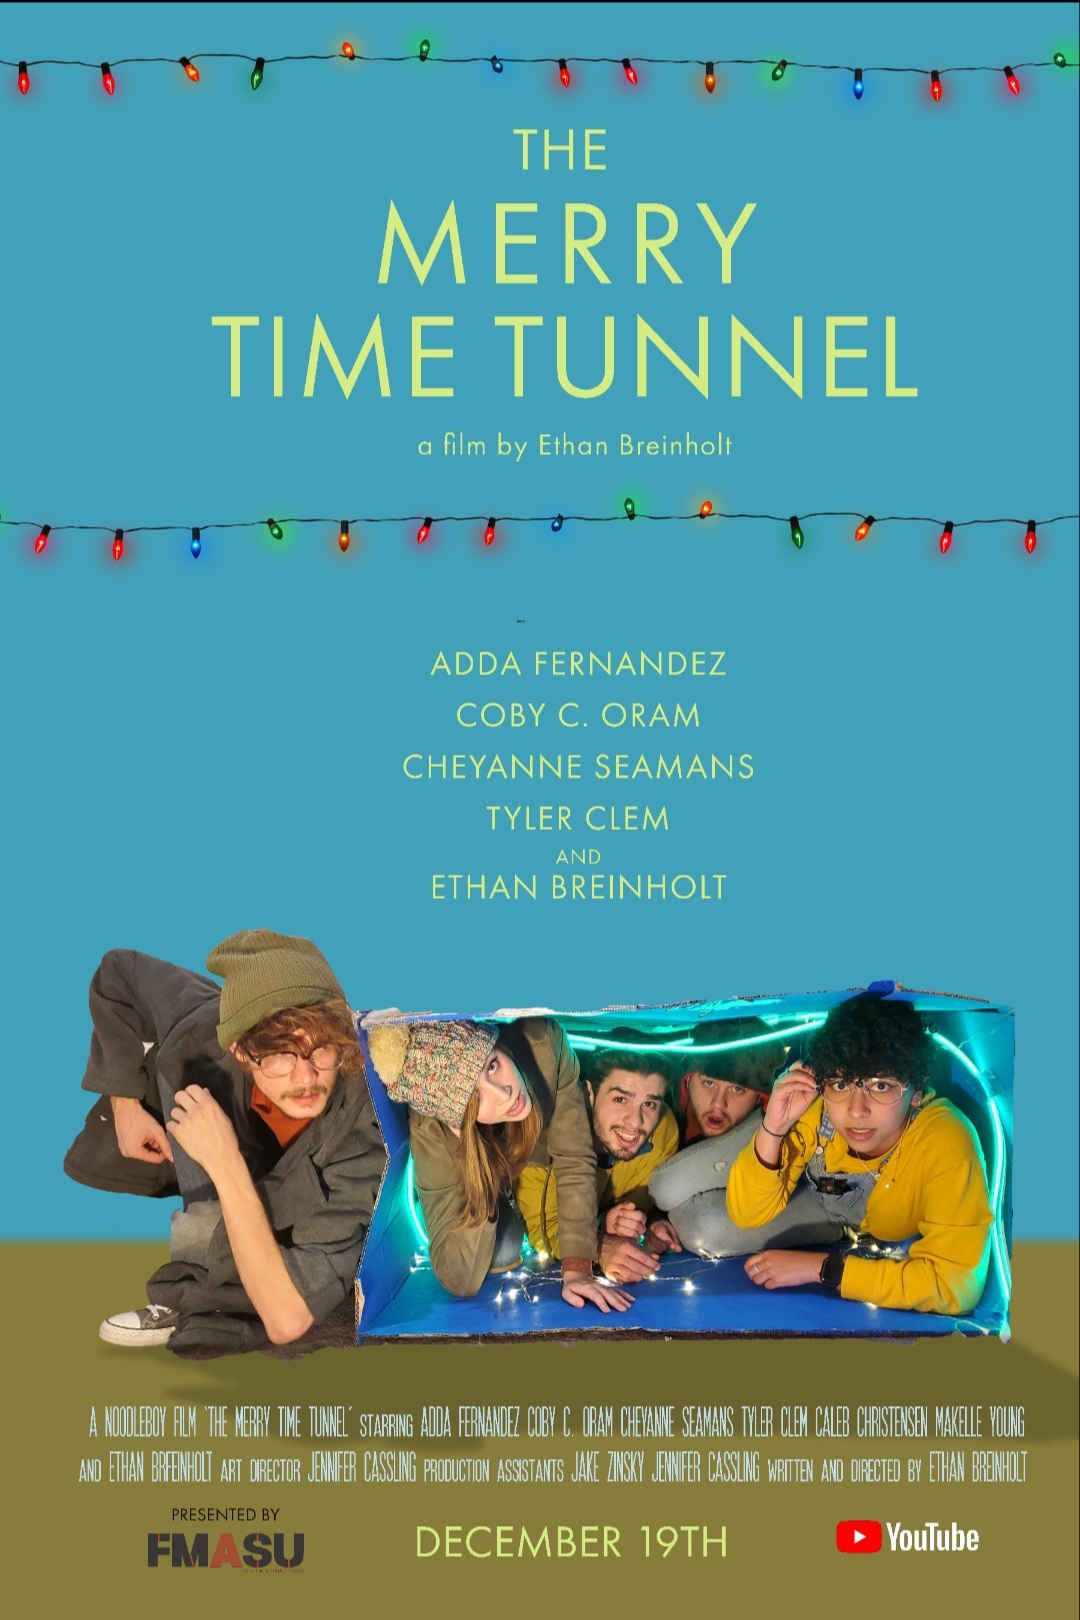 The Merry Time Tunnel